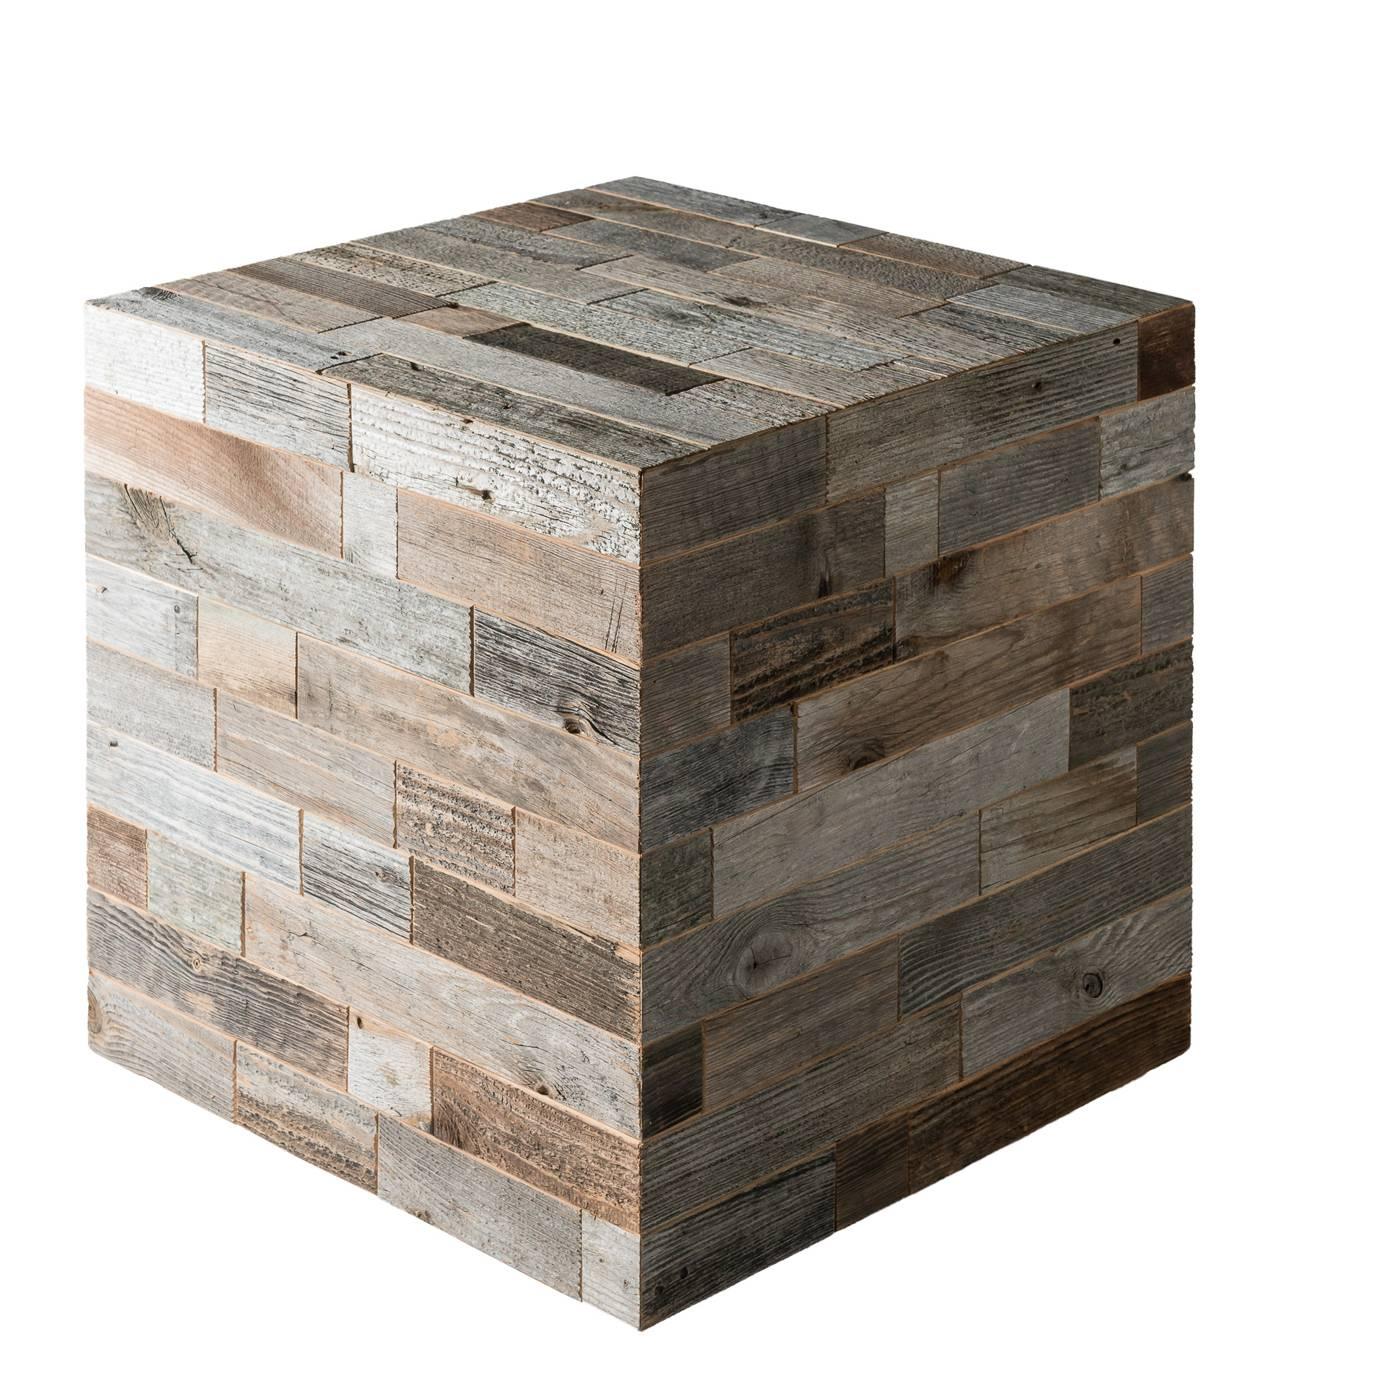 This contemporary design performs a dual function: decorative and functional. Its cubic shape is made of strips of wood recovered from the beams and planks of old barns that are restored by hand and have a different color resulting from exposure to